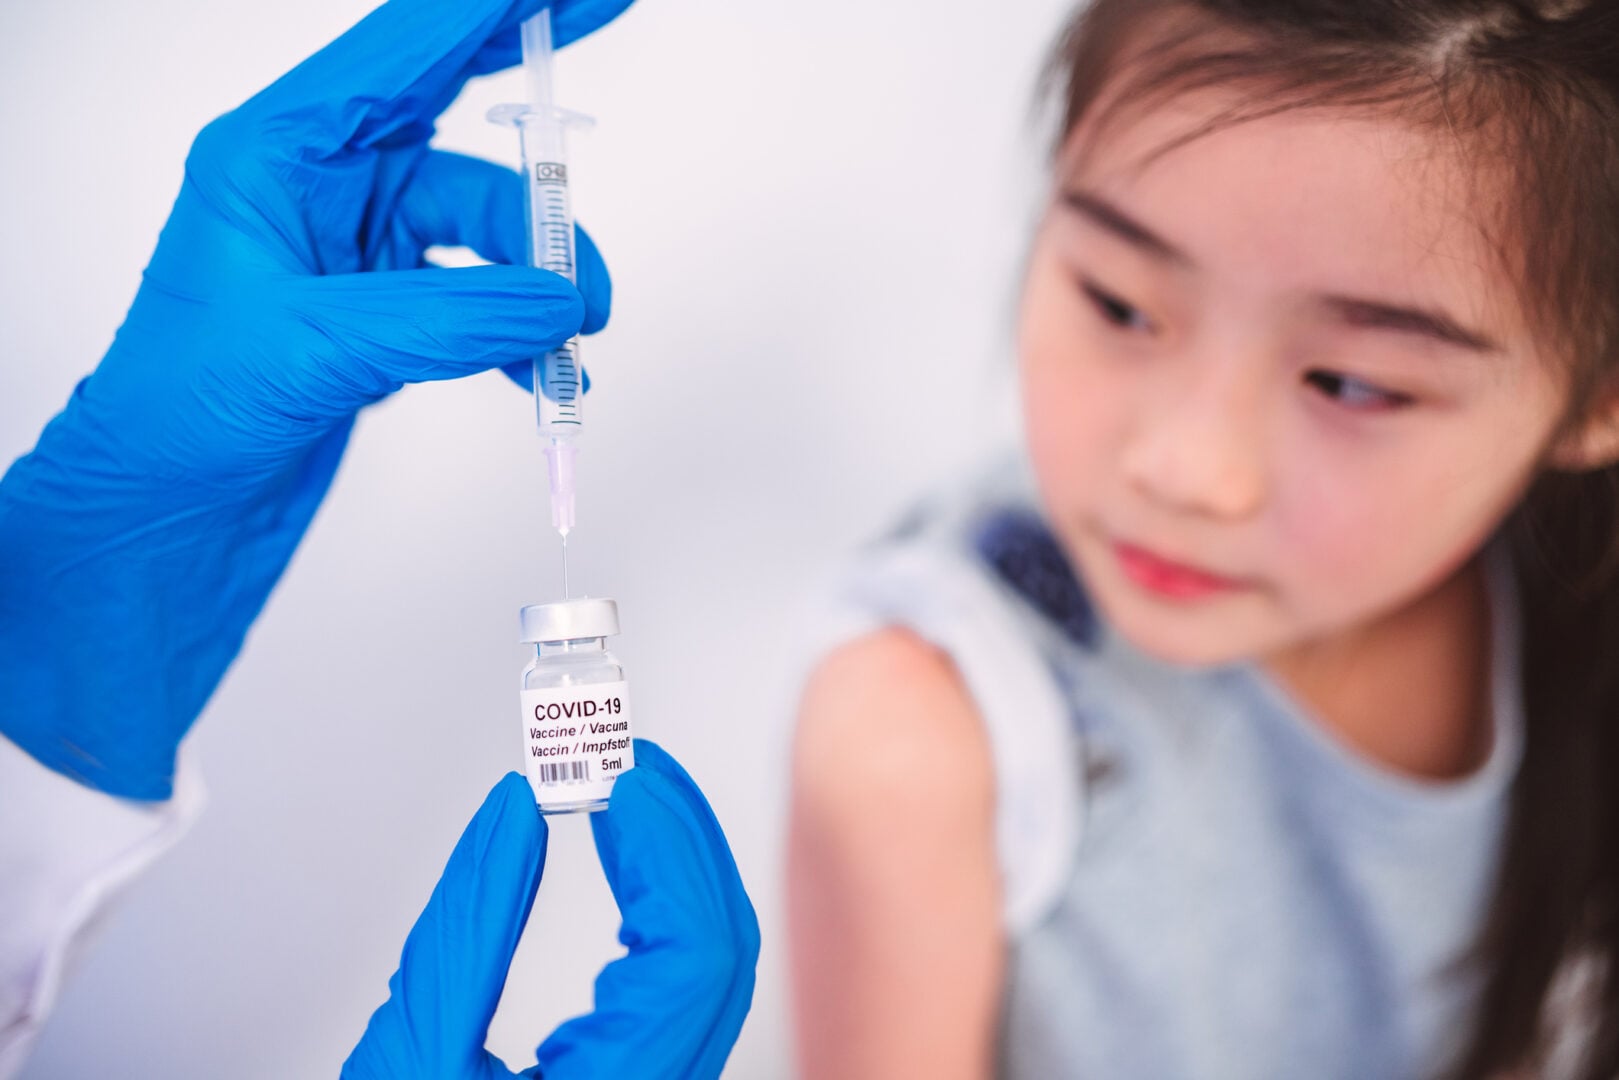 Majority of parents plan to get kids ages 5-11 vaccinated against COVID-19, survey finds